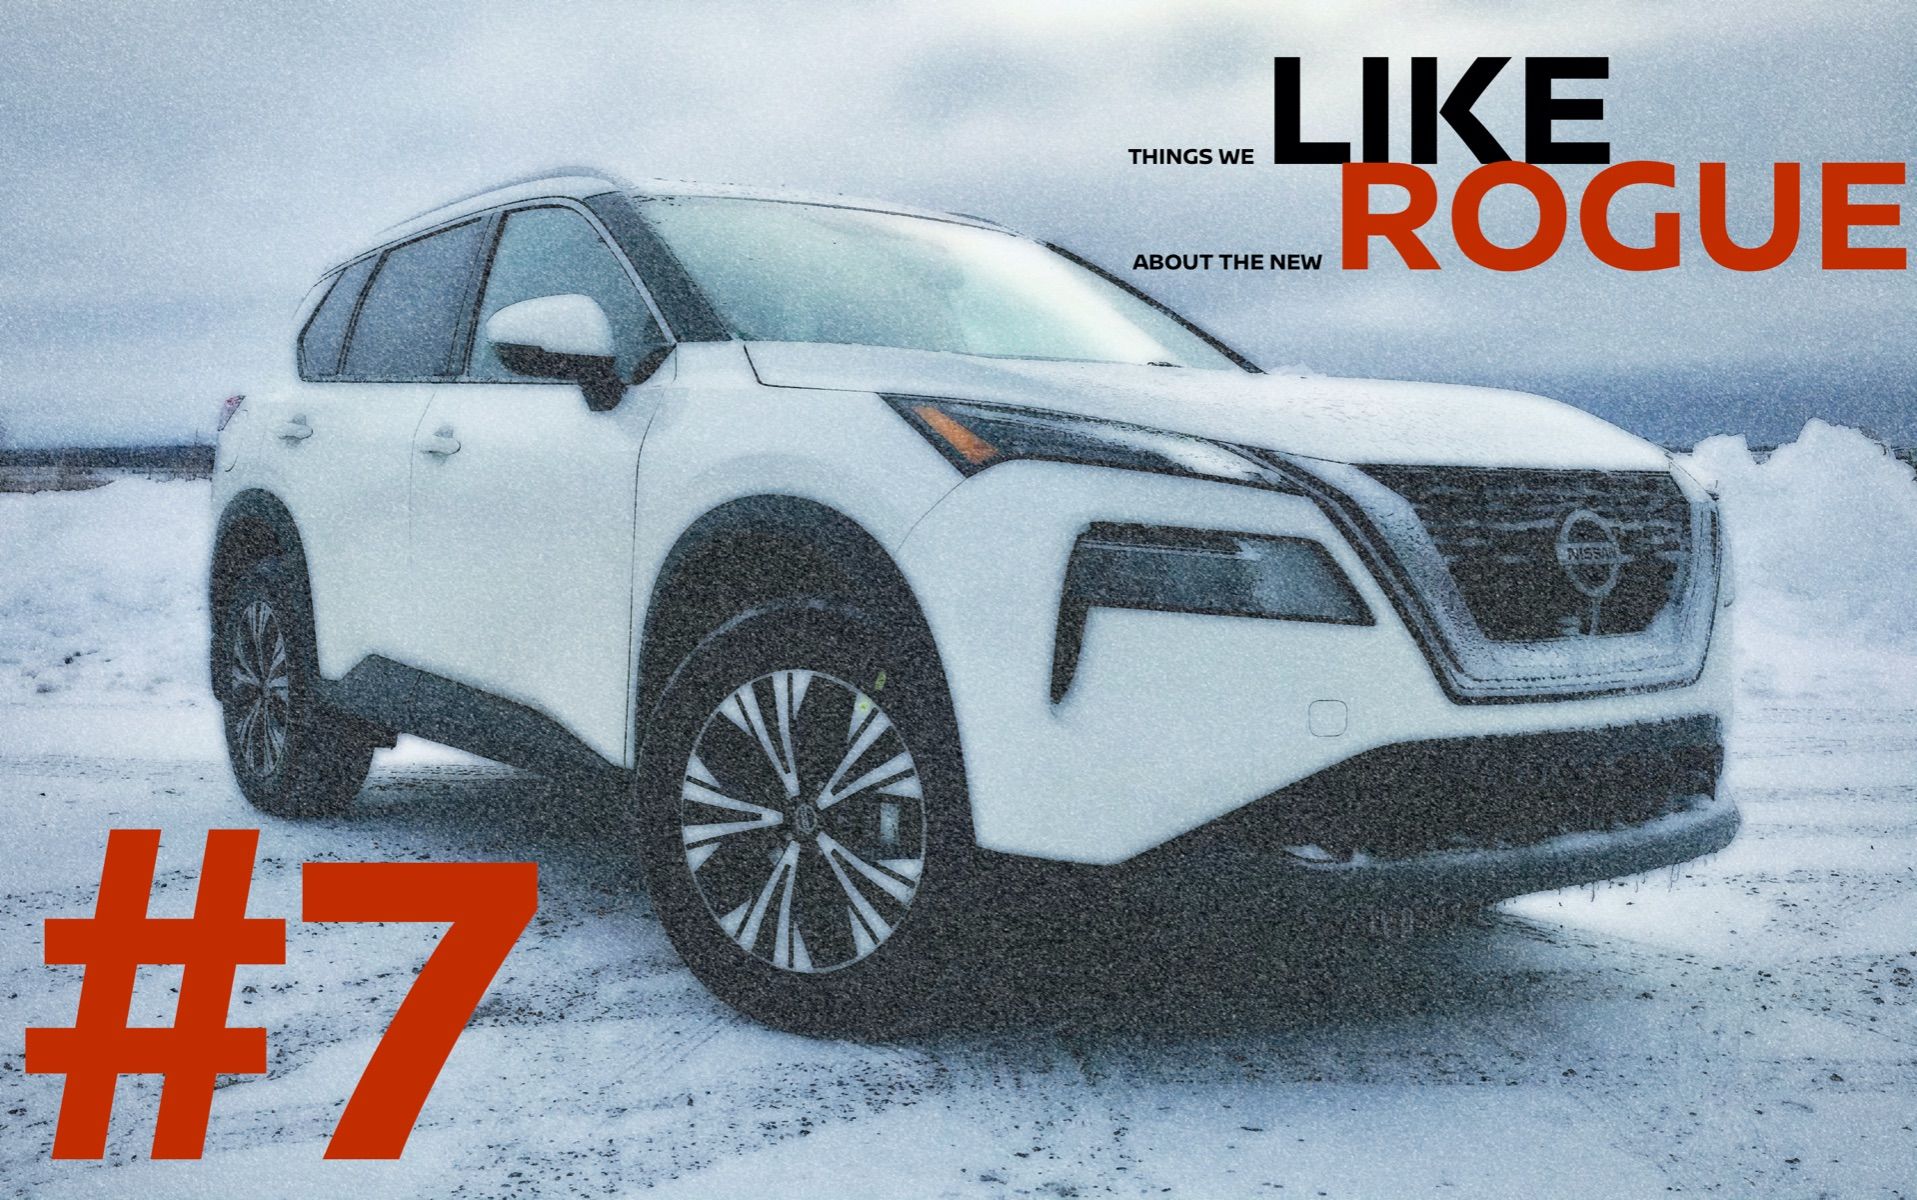 Things We Love About Our All-New 2021 Nissan Rogue #7: It's Quick